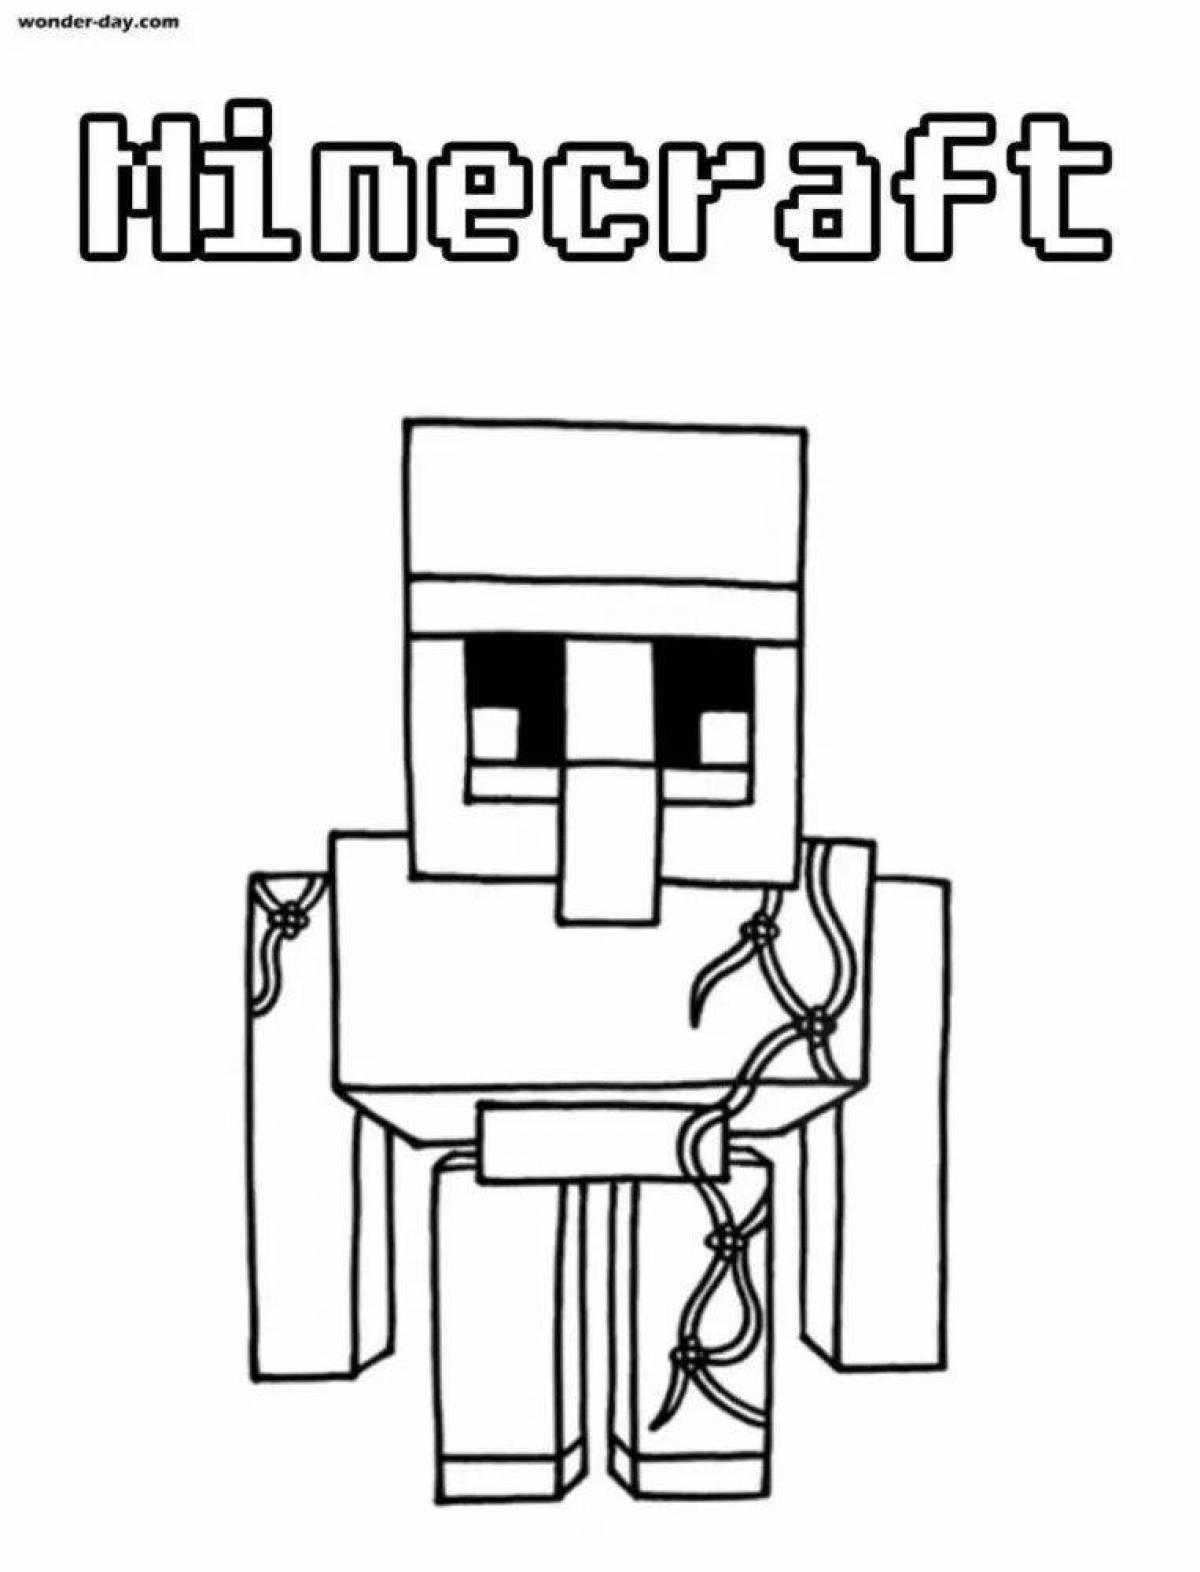 Exciting minecraft golem coloring book